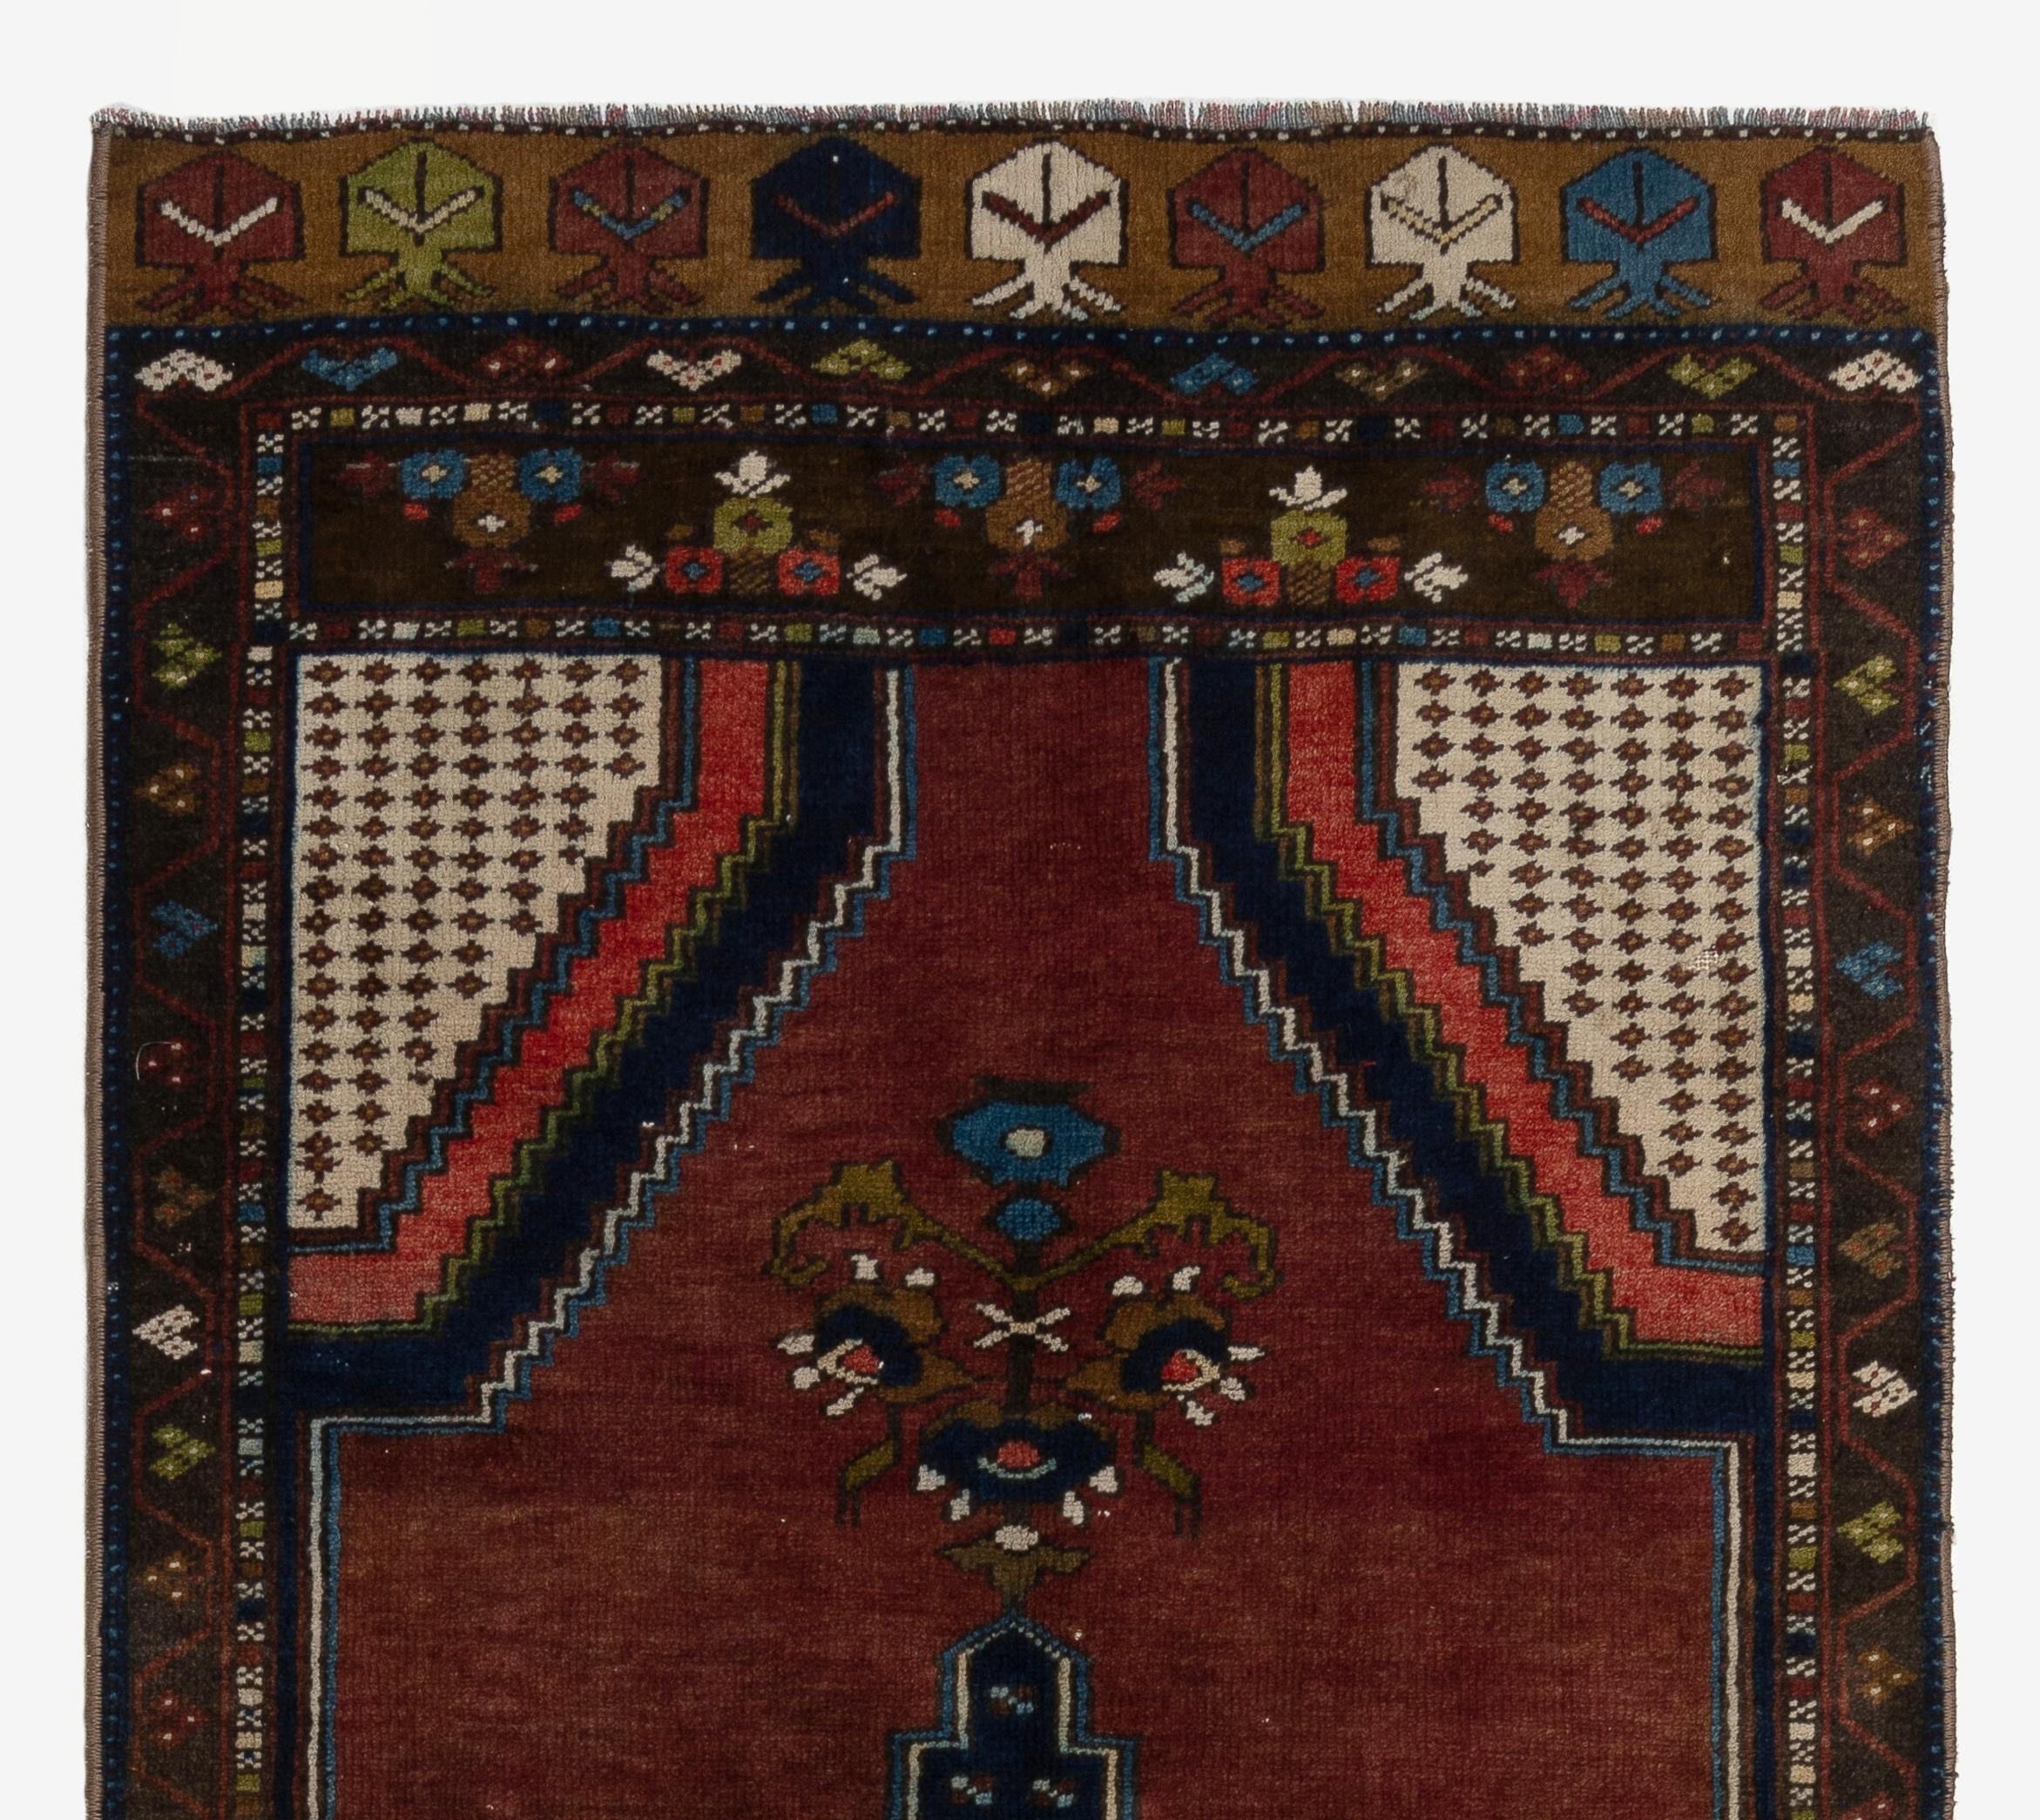 A finely hand-knotted vintage Turkish carpet from 1960s featuring a geometric medallion design. The rug is made of medium wool pile on wool foundation. It is heavy and lays flat on the floor, in very good condition with no issues. It has been washed